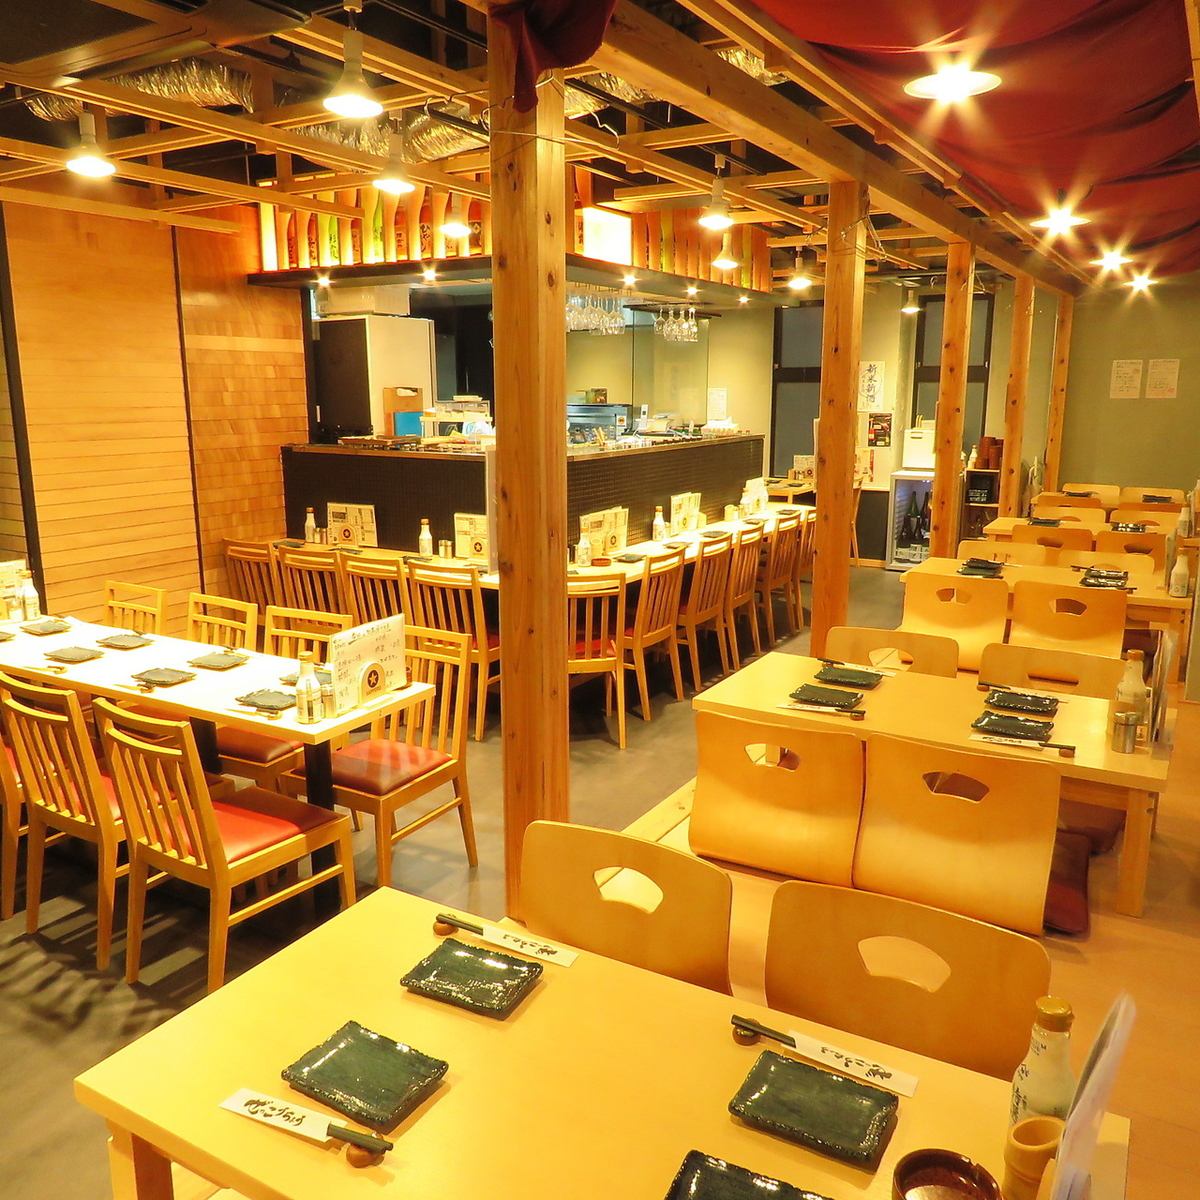 A 2-minute walk from the station! Clean interior ♪ For dates and casual meals!